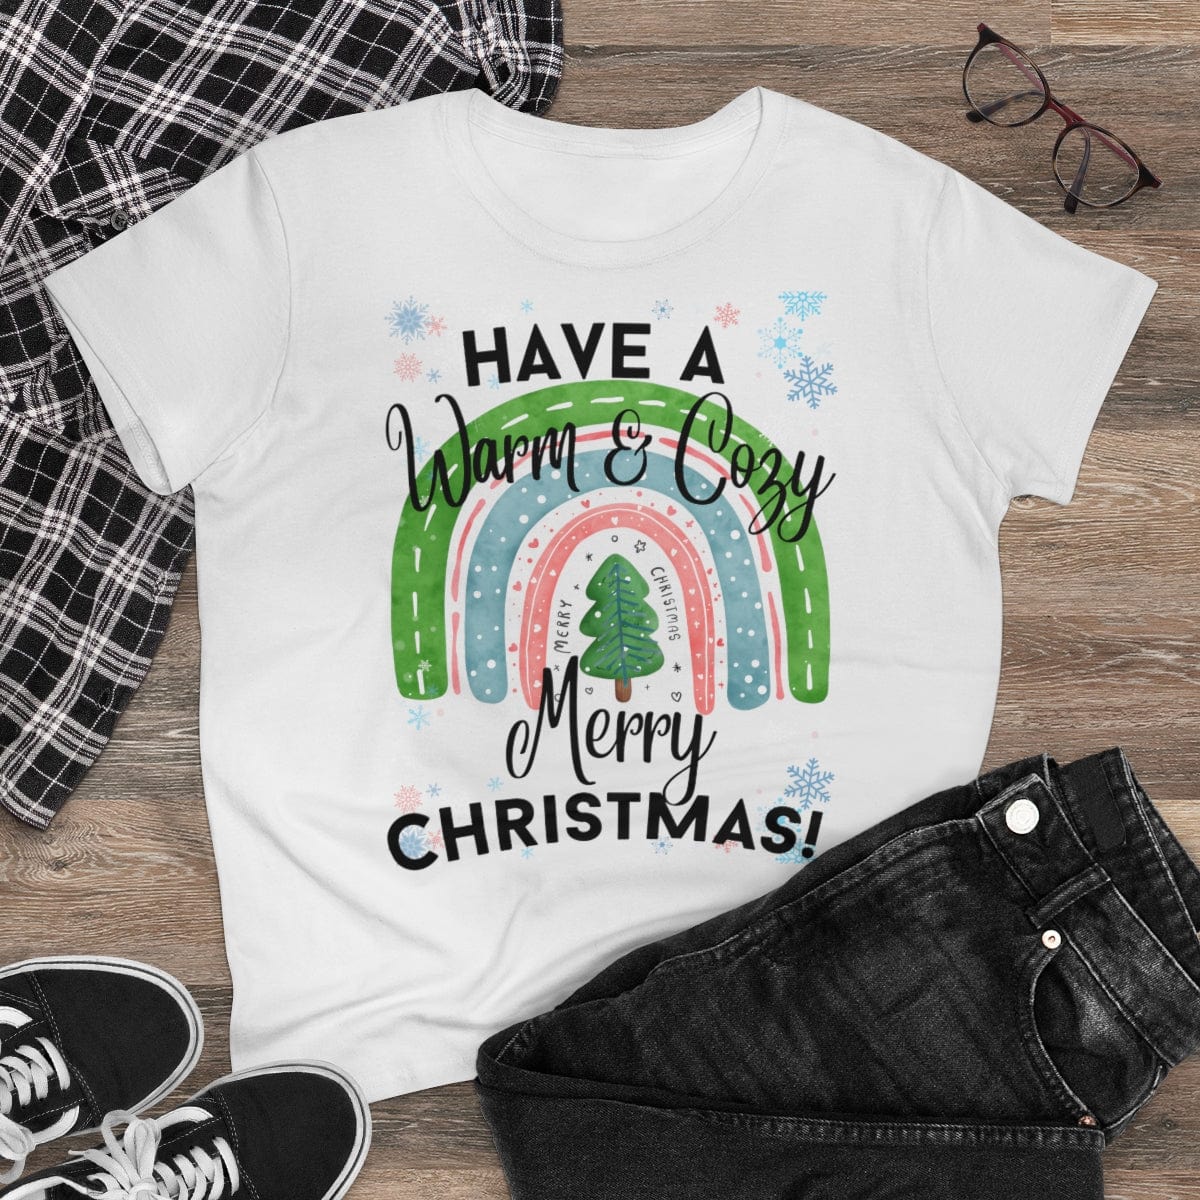 Printify T-Shirt White / S Women's Midweight Cotton Tee *Have a Warm & Cozy Merry Christmas!*